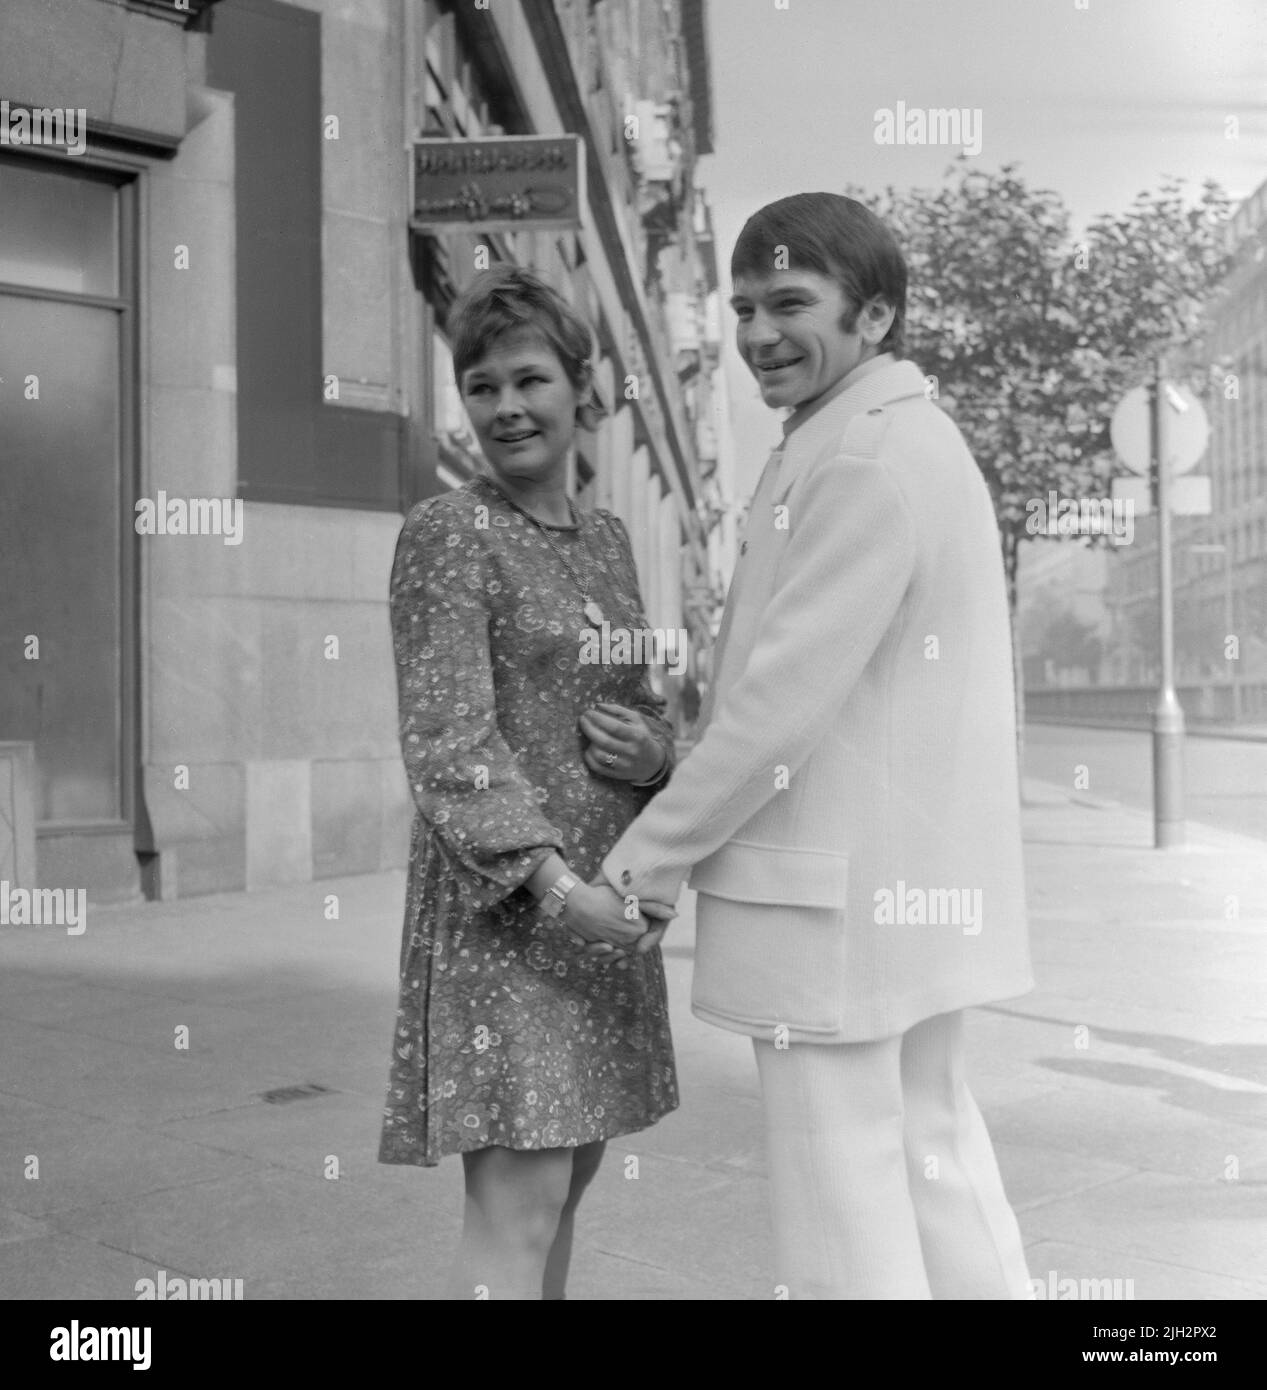 English actress Judi Dench and her then fiancé the actor Michael Williams, pose for the camera, after their engagement, in London in 1970. Stock Photo